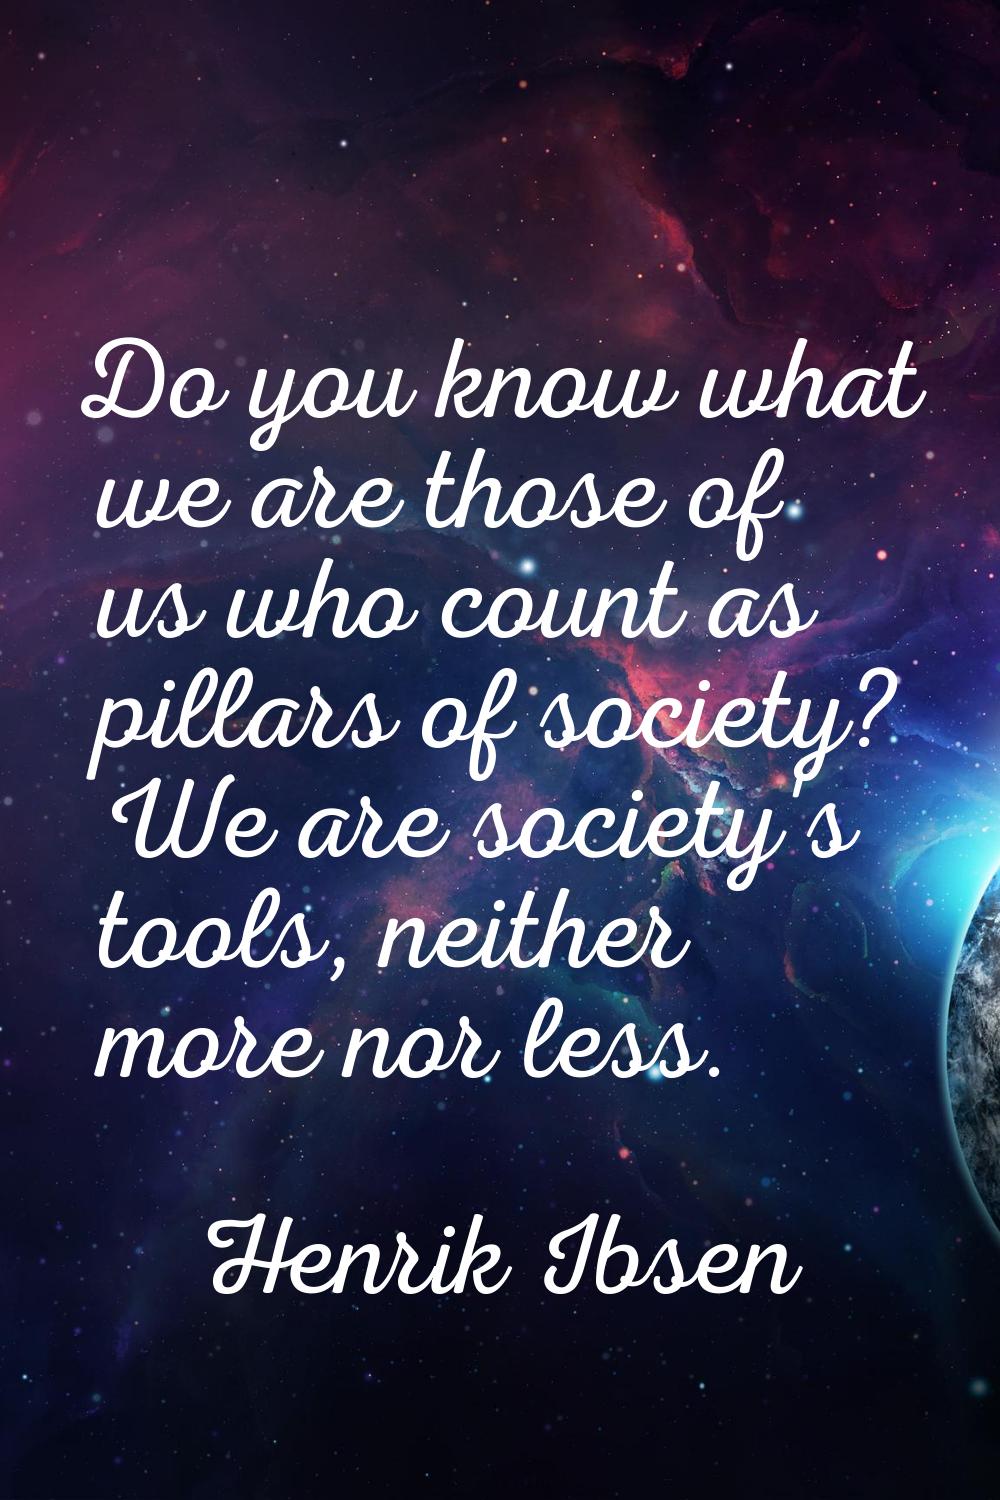 Do you know what we are those of us who count as pillars of society? We are society's tools, neithe